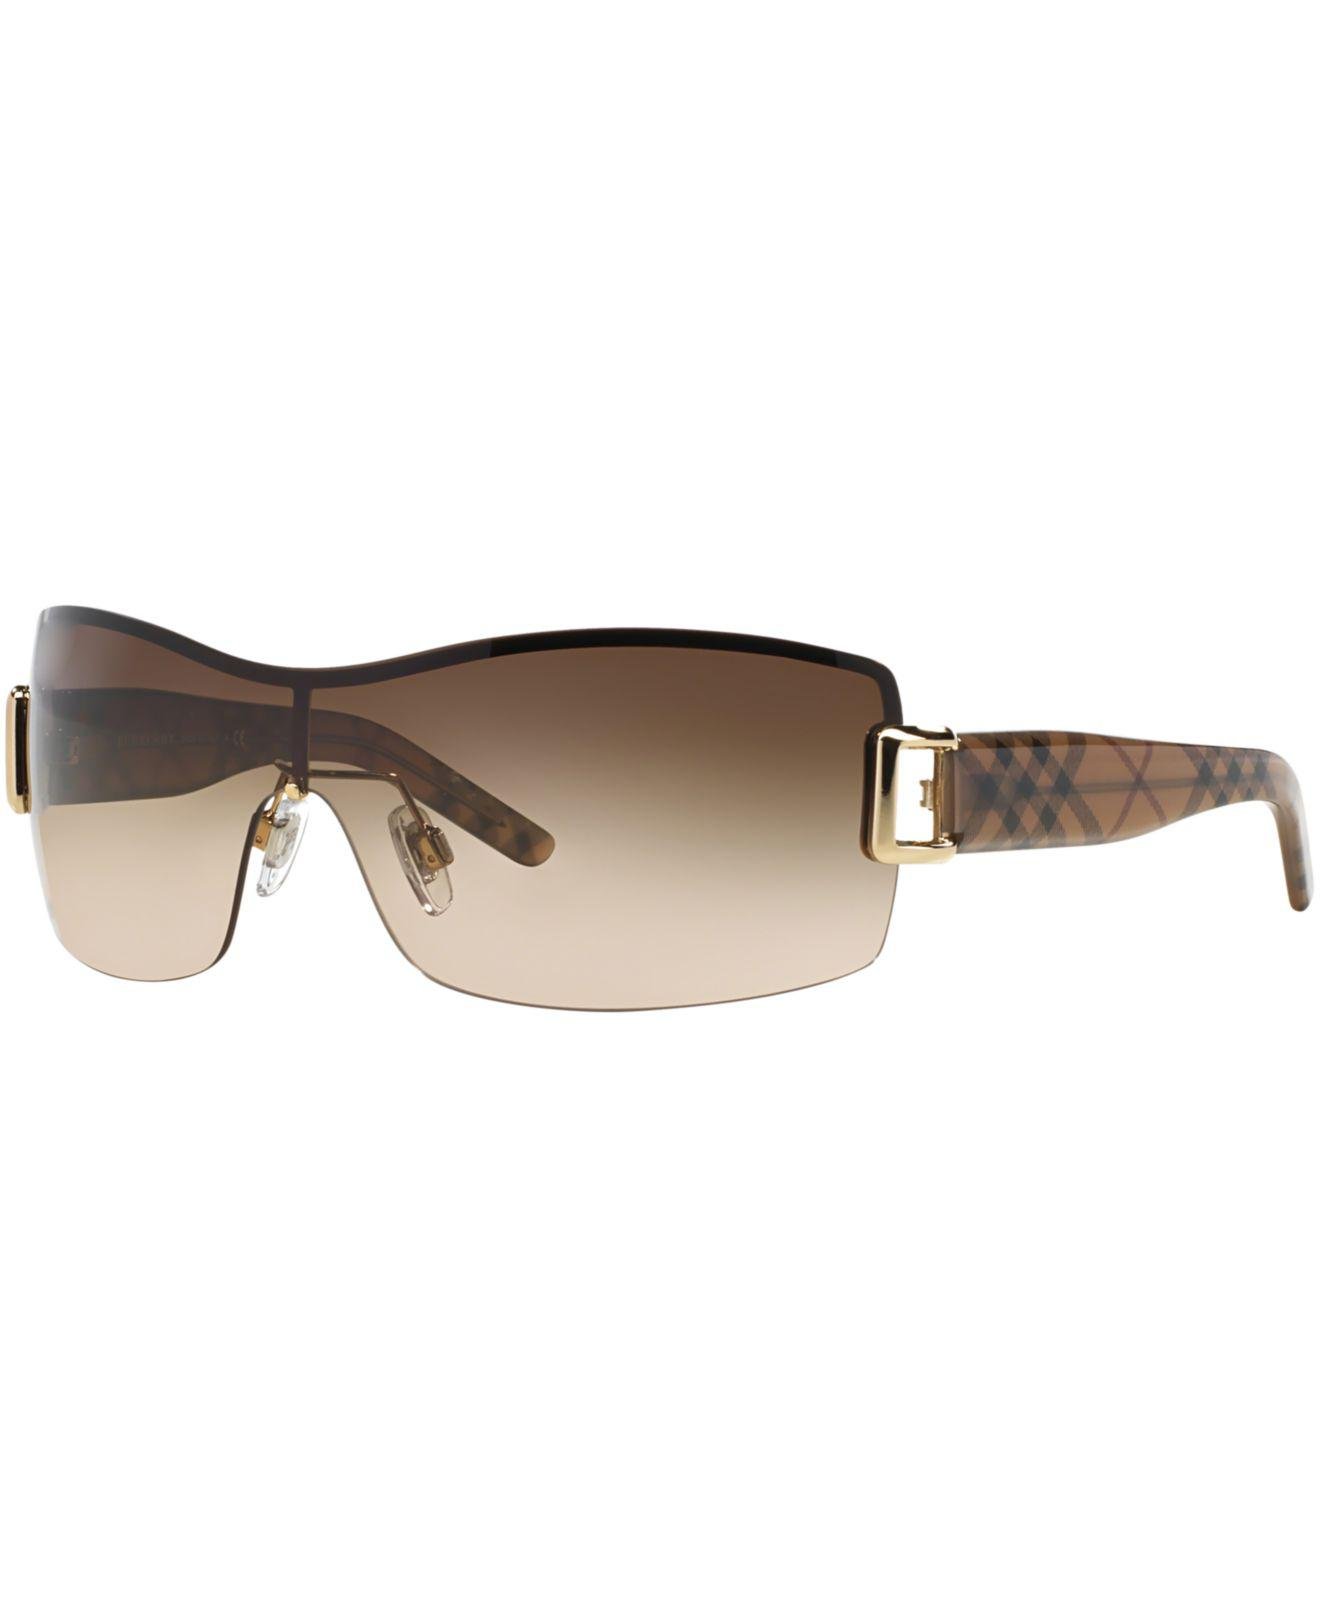 Burberry Sunglasses, Be3043 in Gold/Brown (Brown) - Lyst